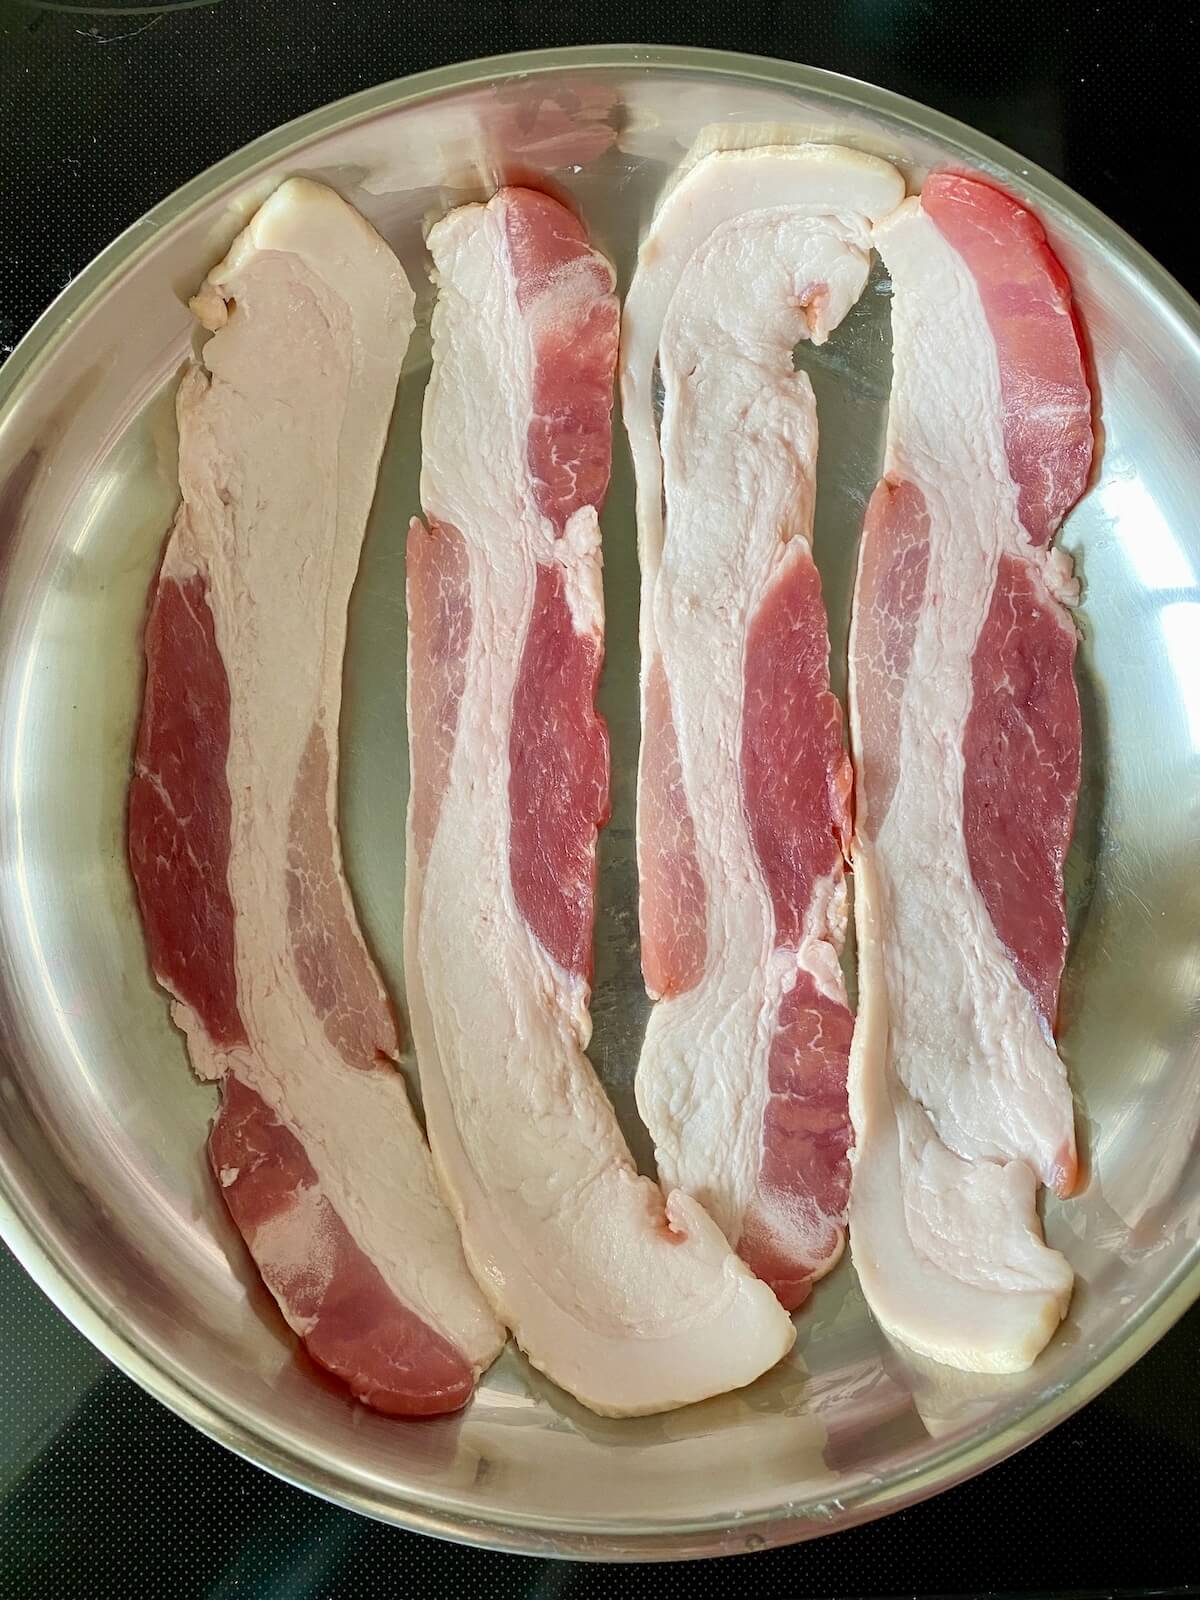 Four strips of raw bacon in a pan on the stove.